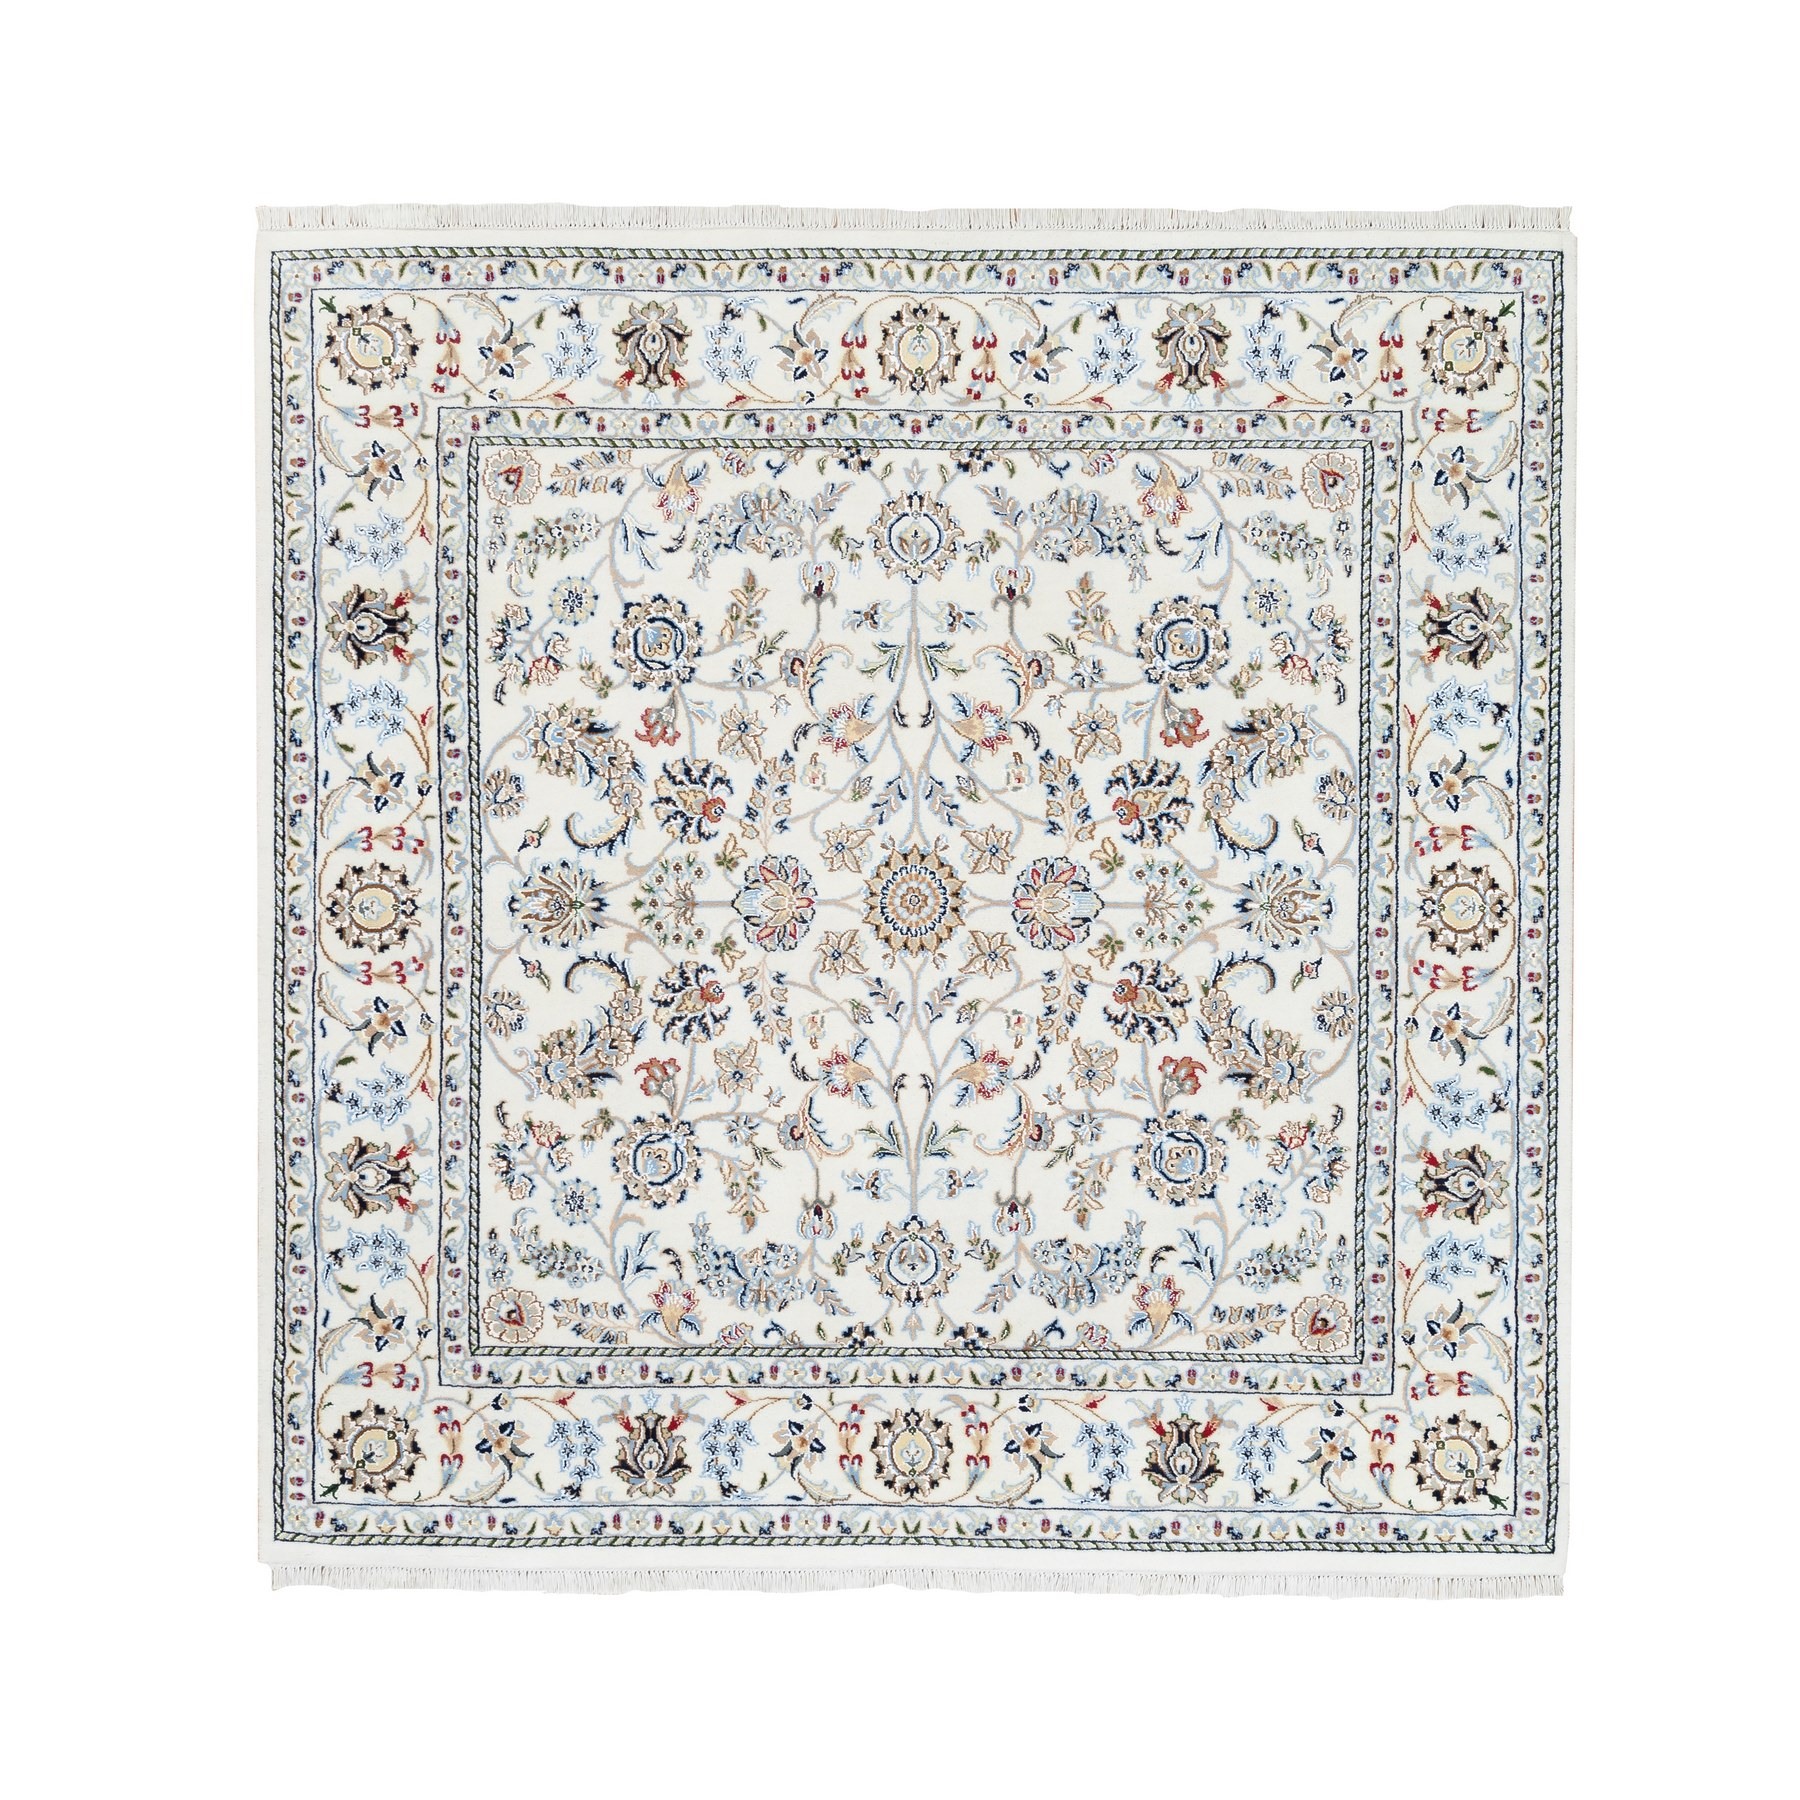 5'9"x5'9" All Over Floral Design Ivory Square Wool and Silk 250 KPSI Nain Hand Woven Fine Oriental Rug 